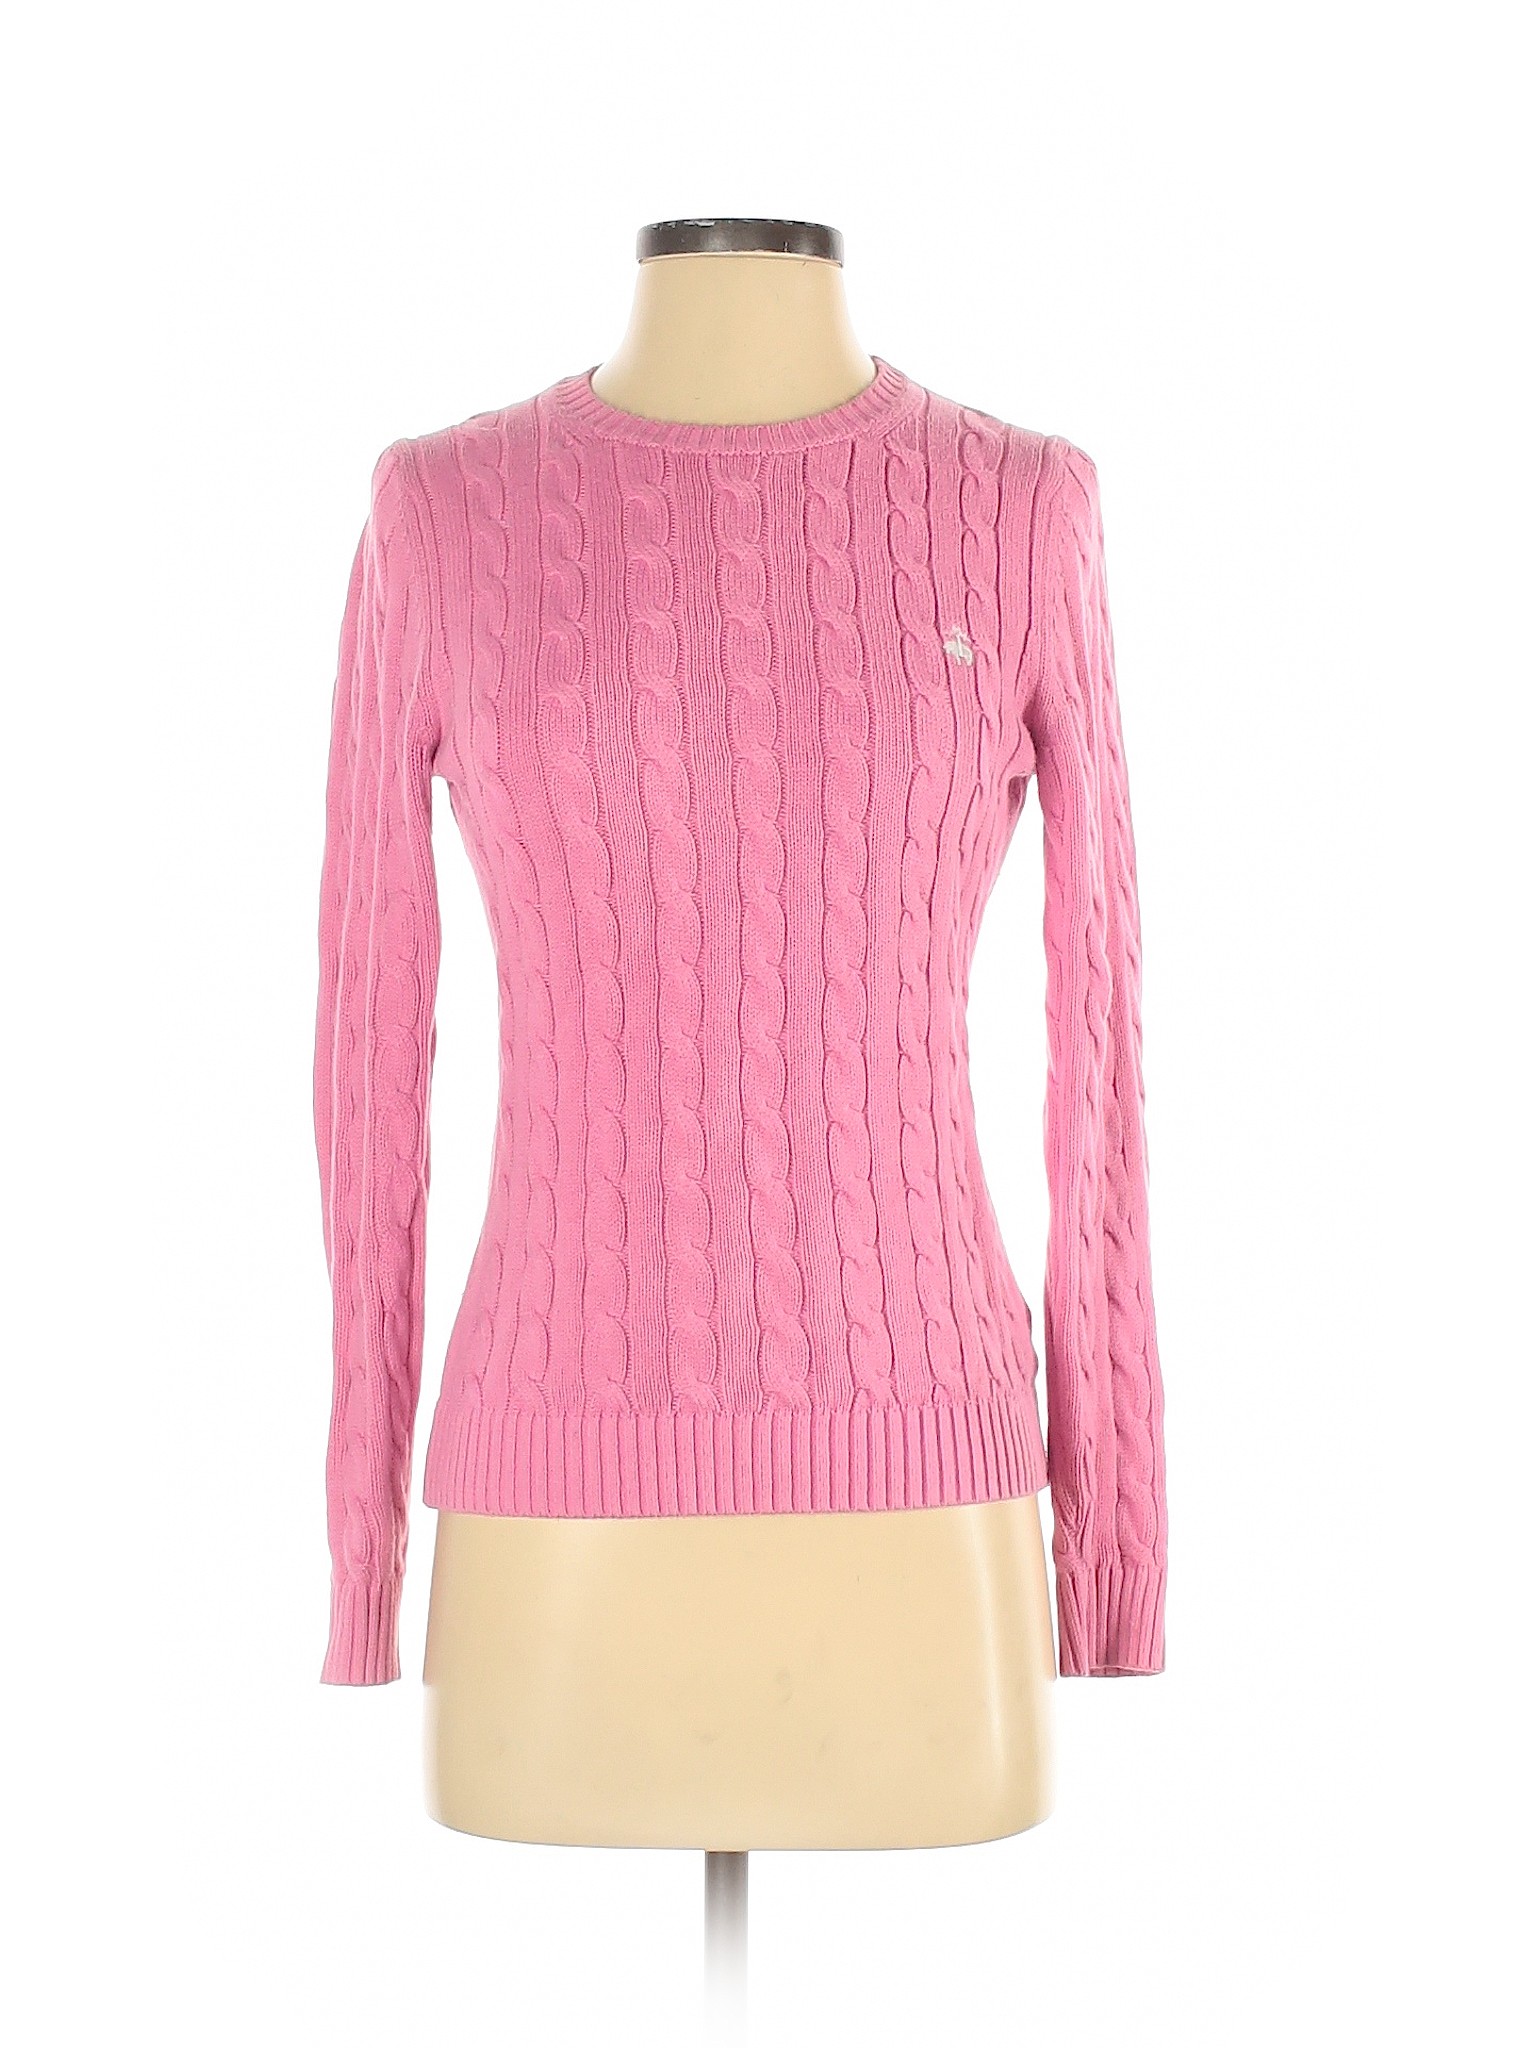 Brooks Brothers 346 Women Pink Pullover Sweater XS | eBay